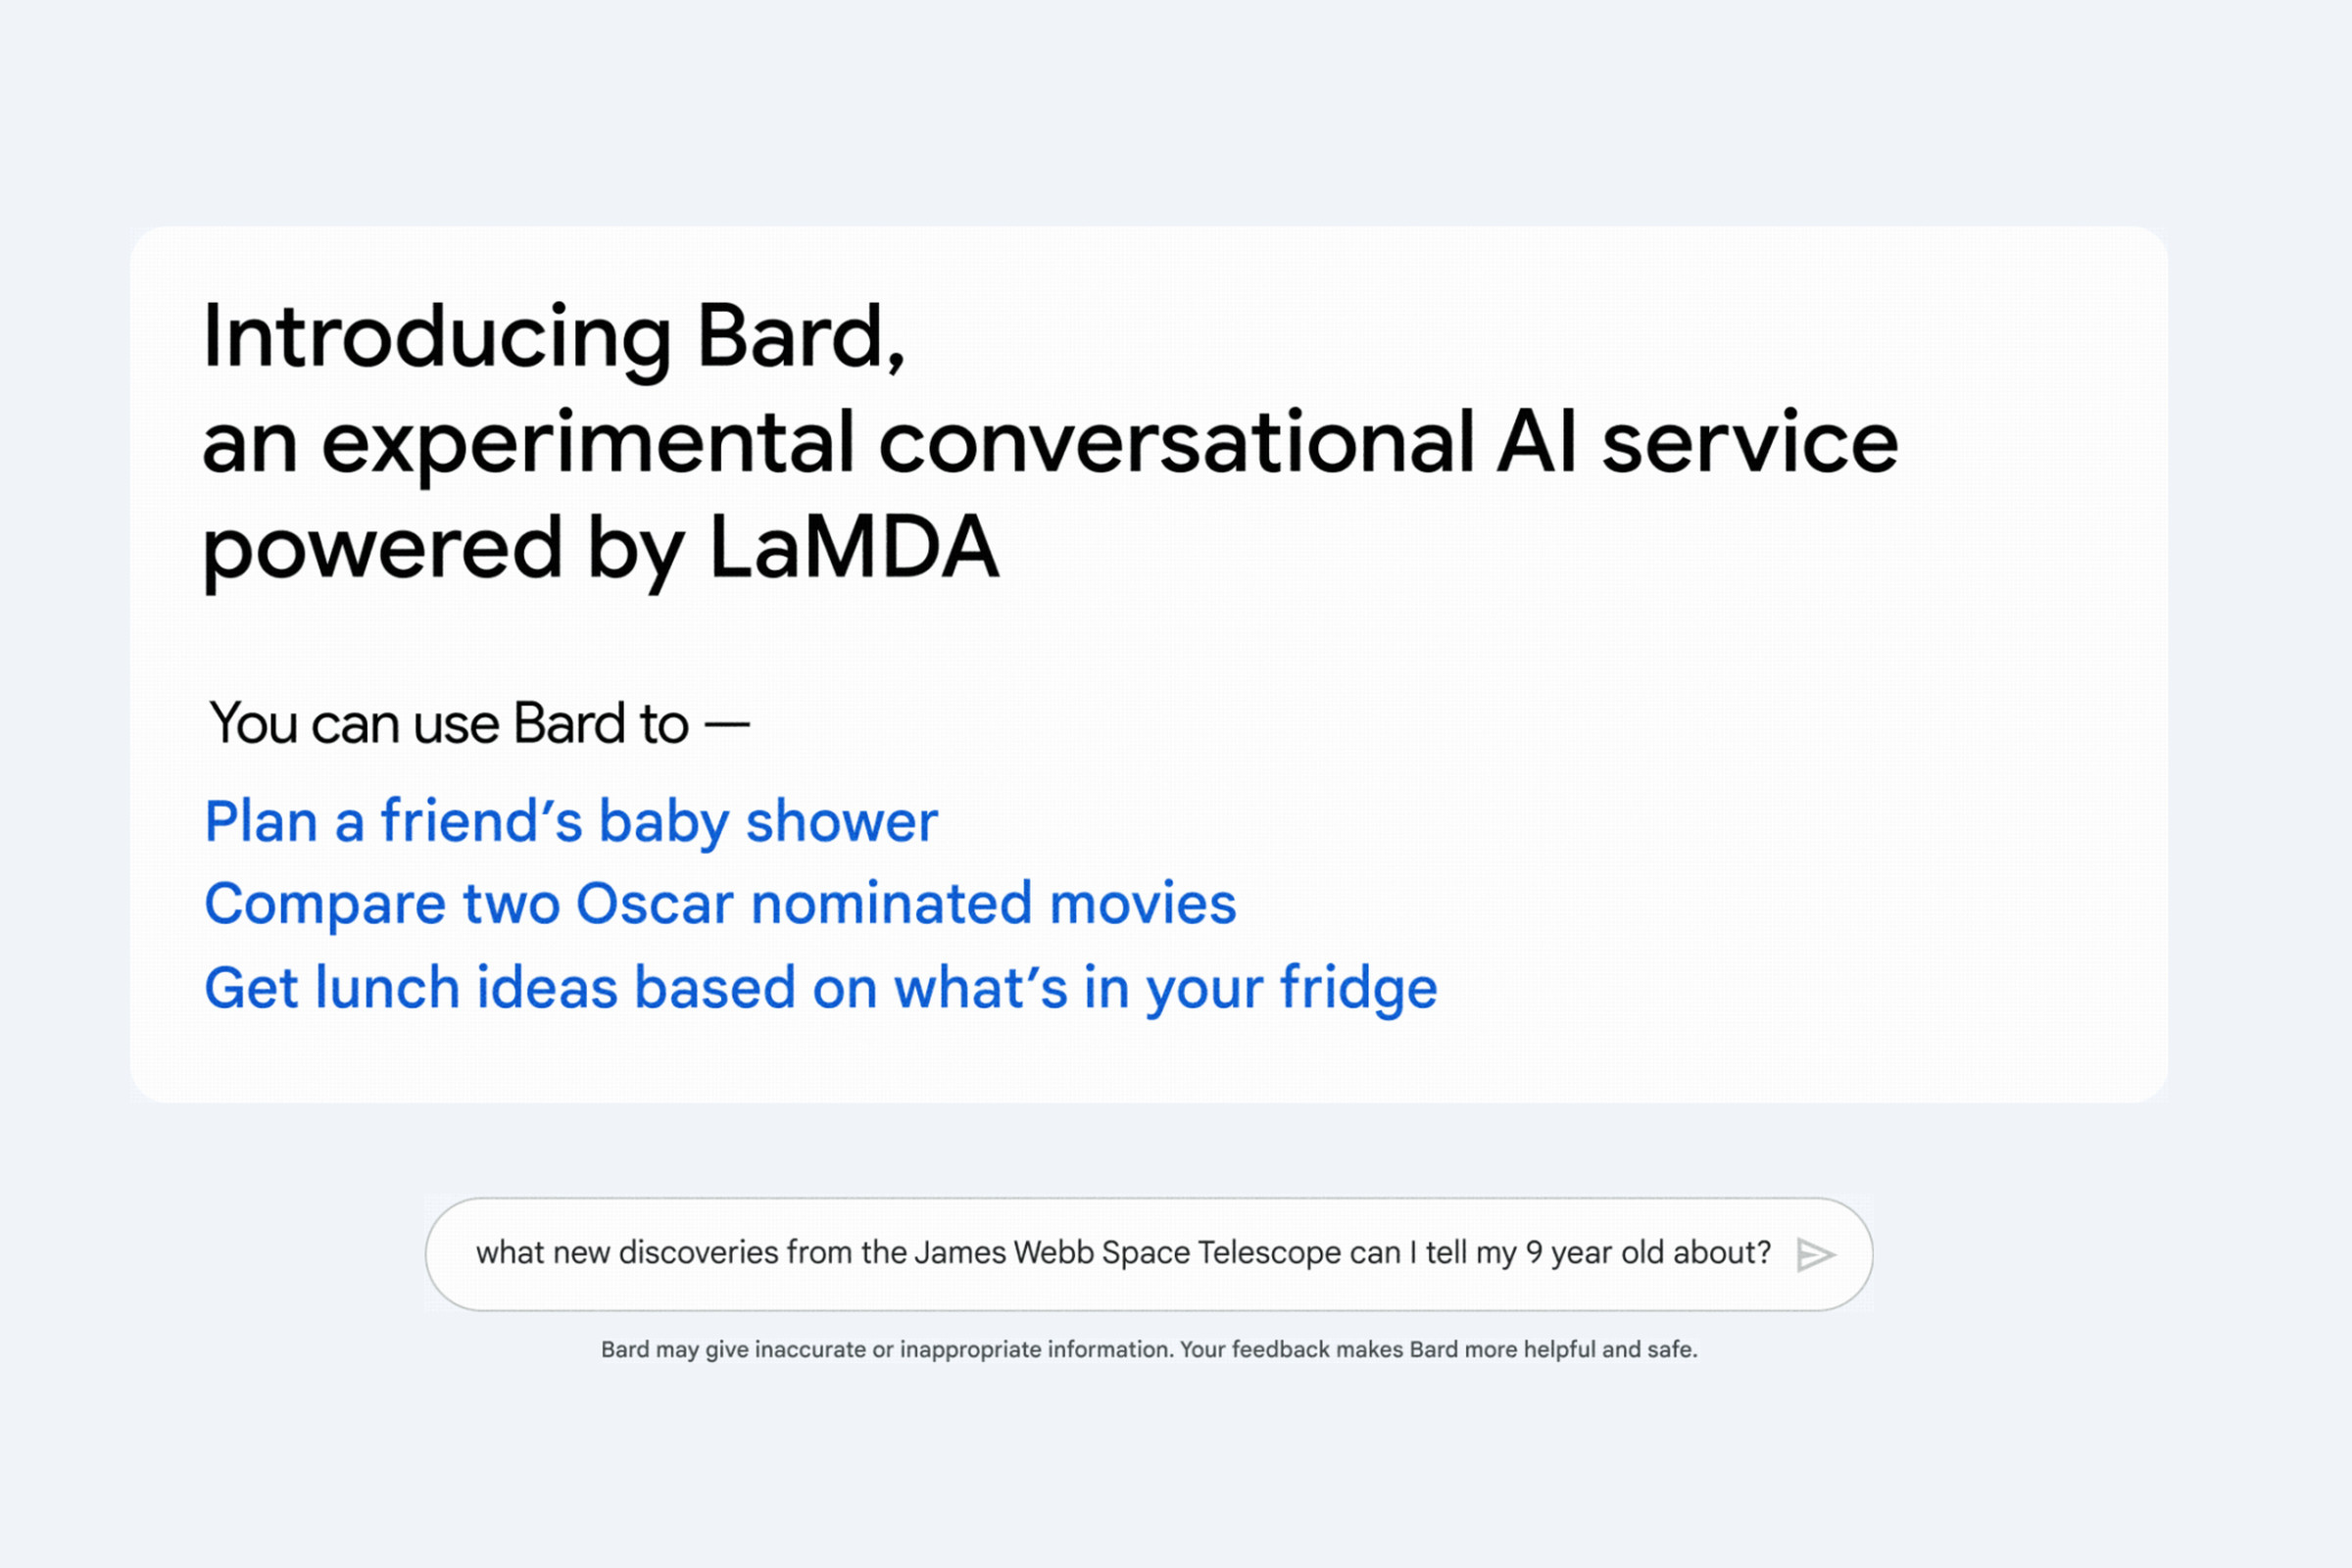 Image with the text: “Introducing Bard, an experimental conversational AI service powered by LaMDA. You can use bard to — plan a friend’s baby shower. Compare two Oscar nominated movies. Get lunch ideas based on what’s in your fridge.” It shows an example search reading “what new discoveres from the James Webb Space Telescope can I tell my 9 year old about?” And includes a warning that “Bard may give inaccurate or inappropriate information. Your feedback makes Bard more helpful and safe.”